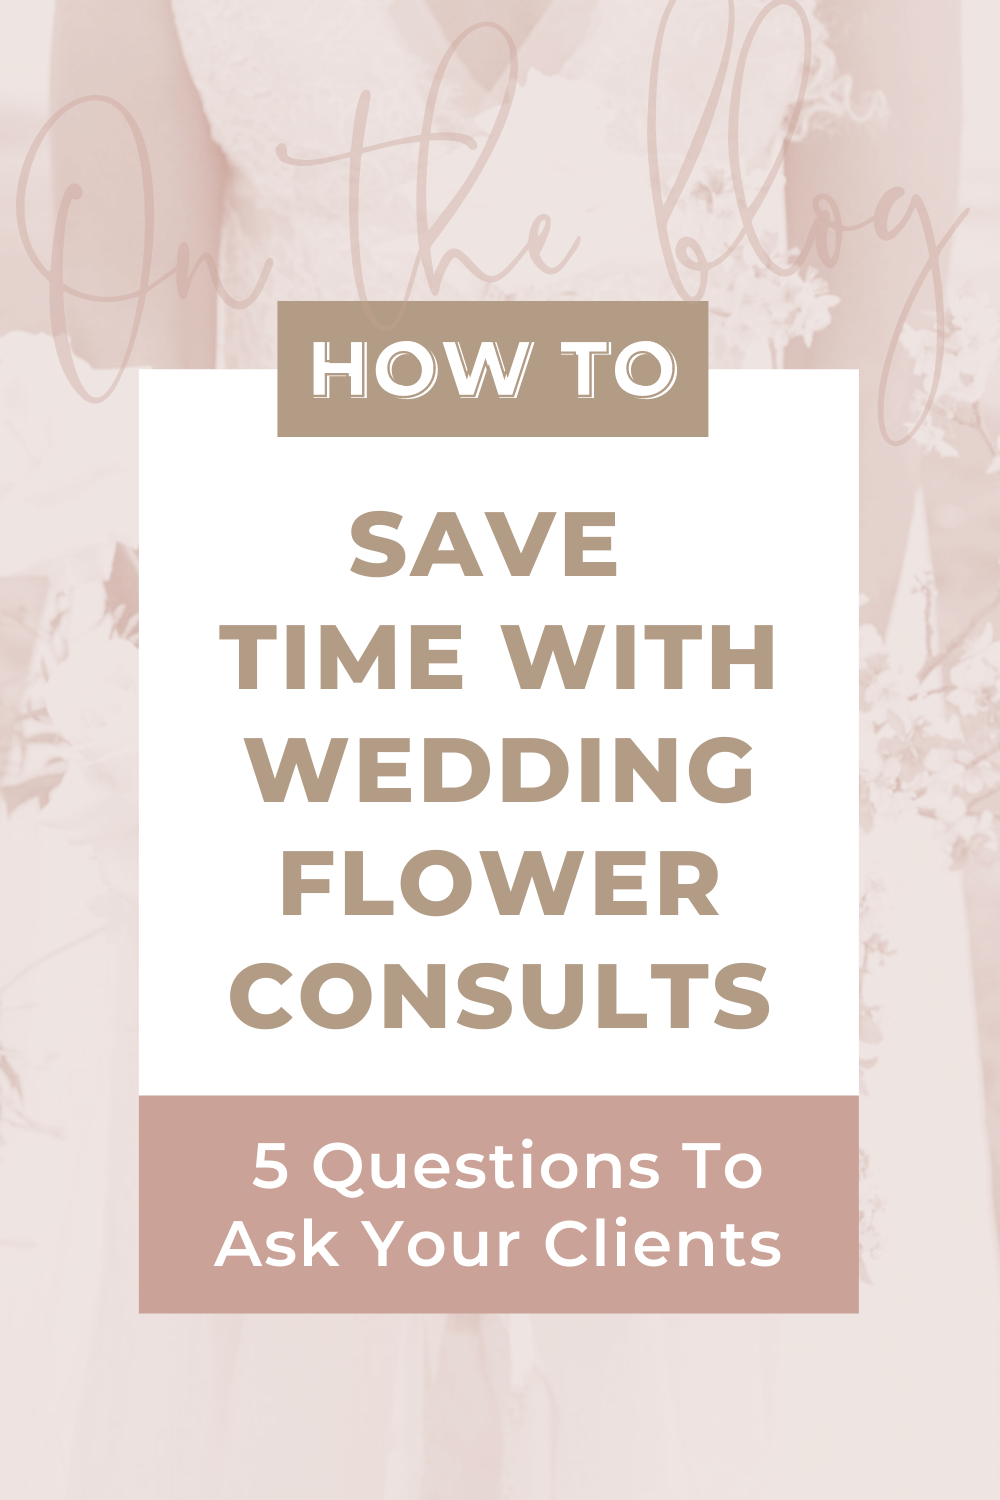 How to Wedding Florist Consults